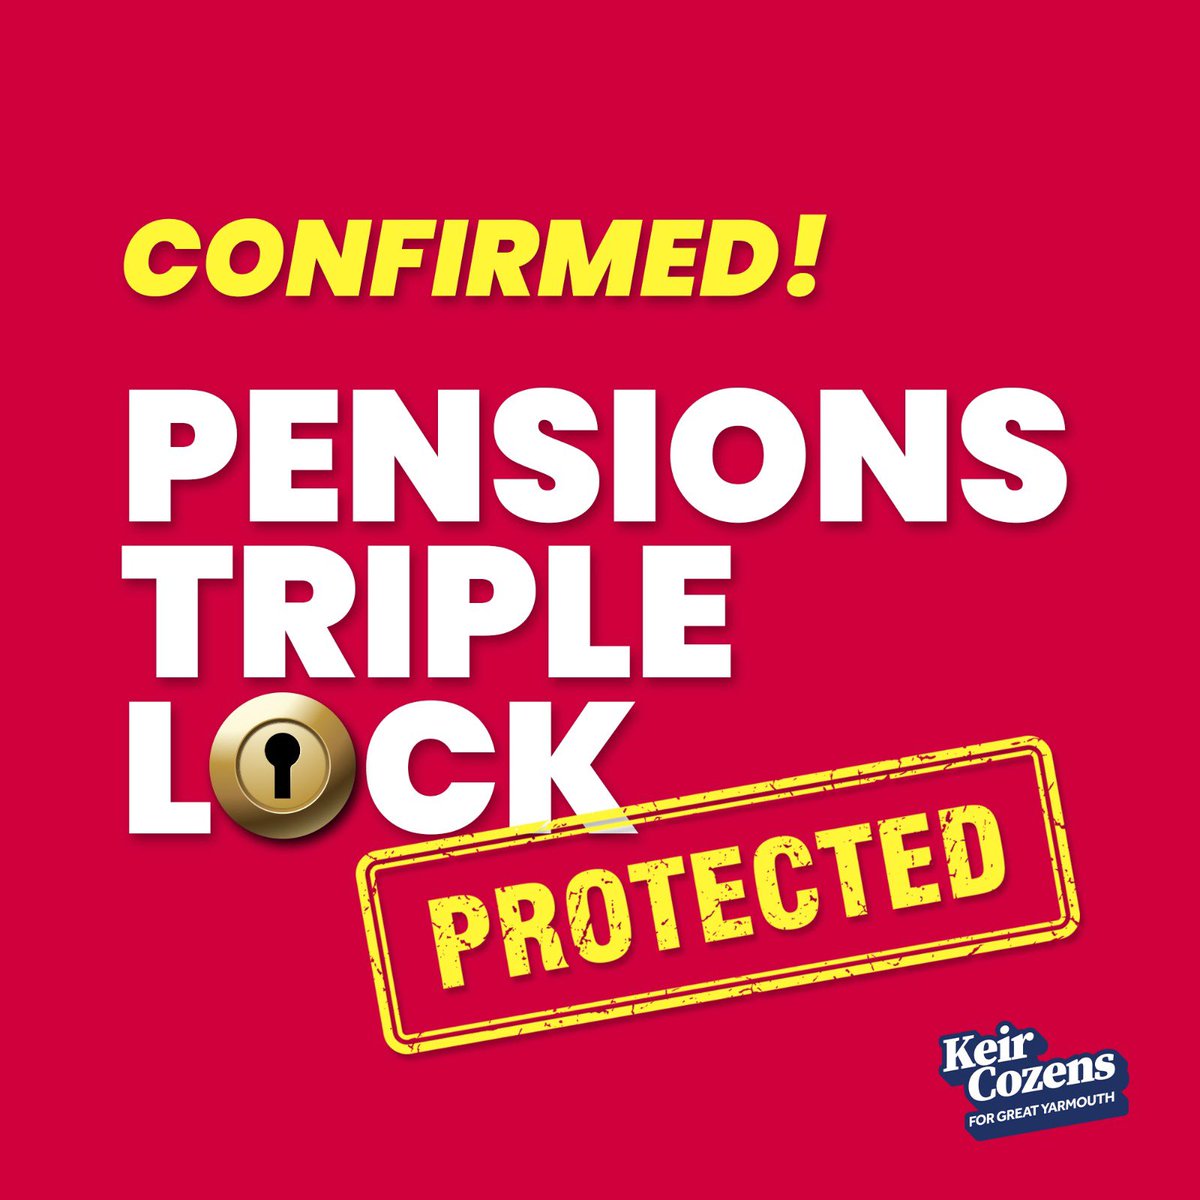 Labour won’t stand by and let more Tory chaos cost British pensioners. That’s why the pensions triple lock will be in the Labour manifesto and protected for the duration of the next parliament.